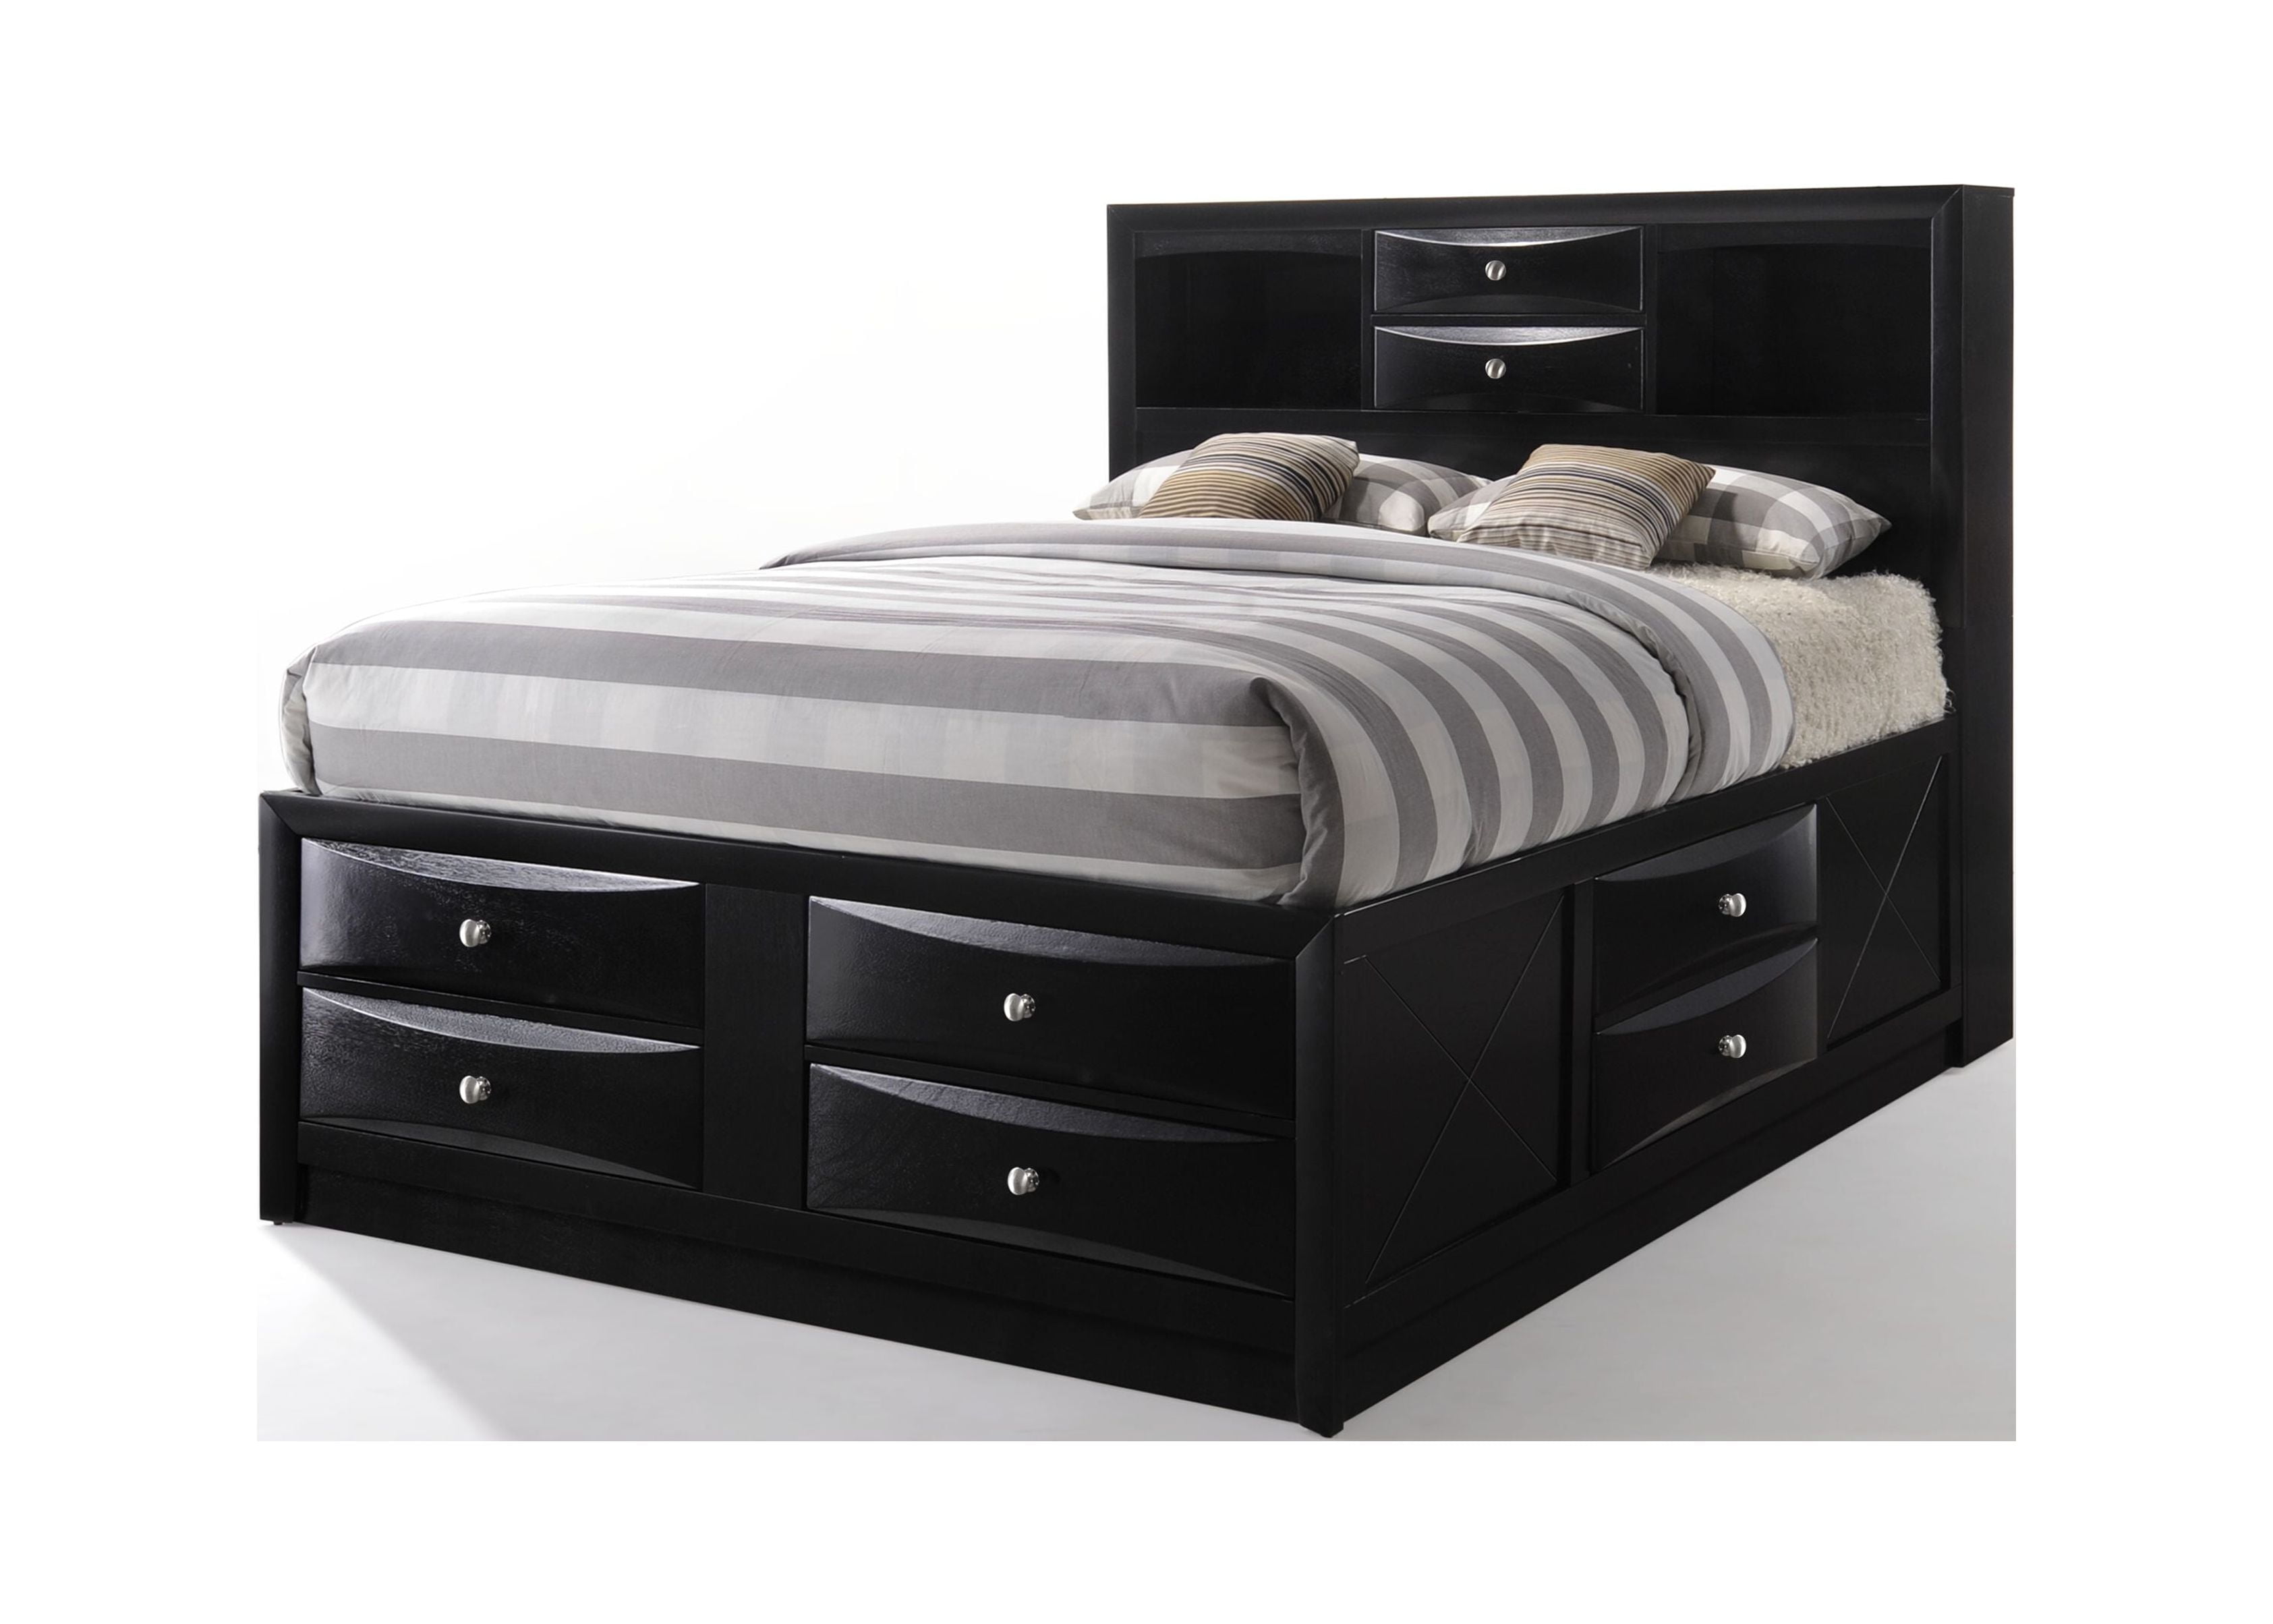 Picture of ACME 21620F Ireland Full Size Bed with Storage - Black, 4 Piece